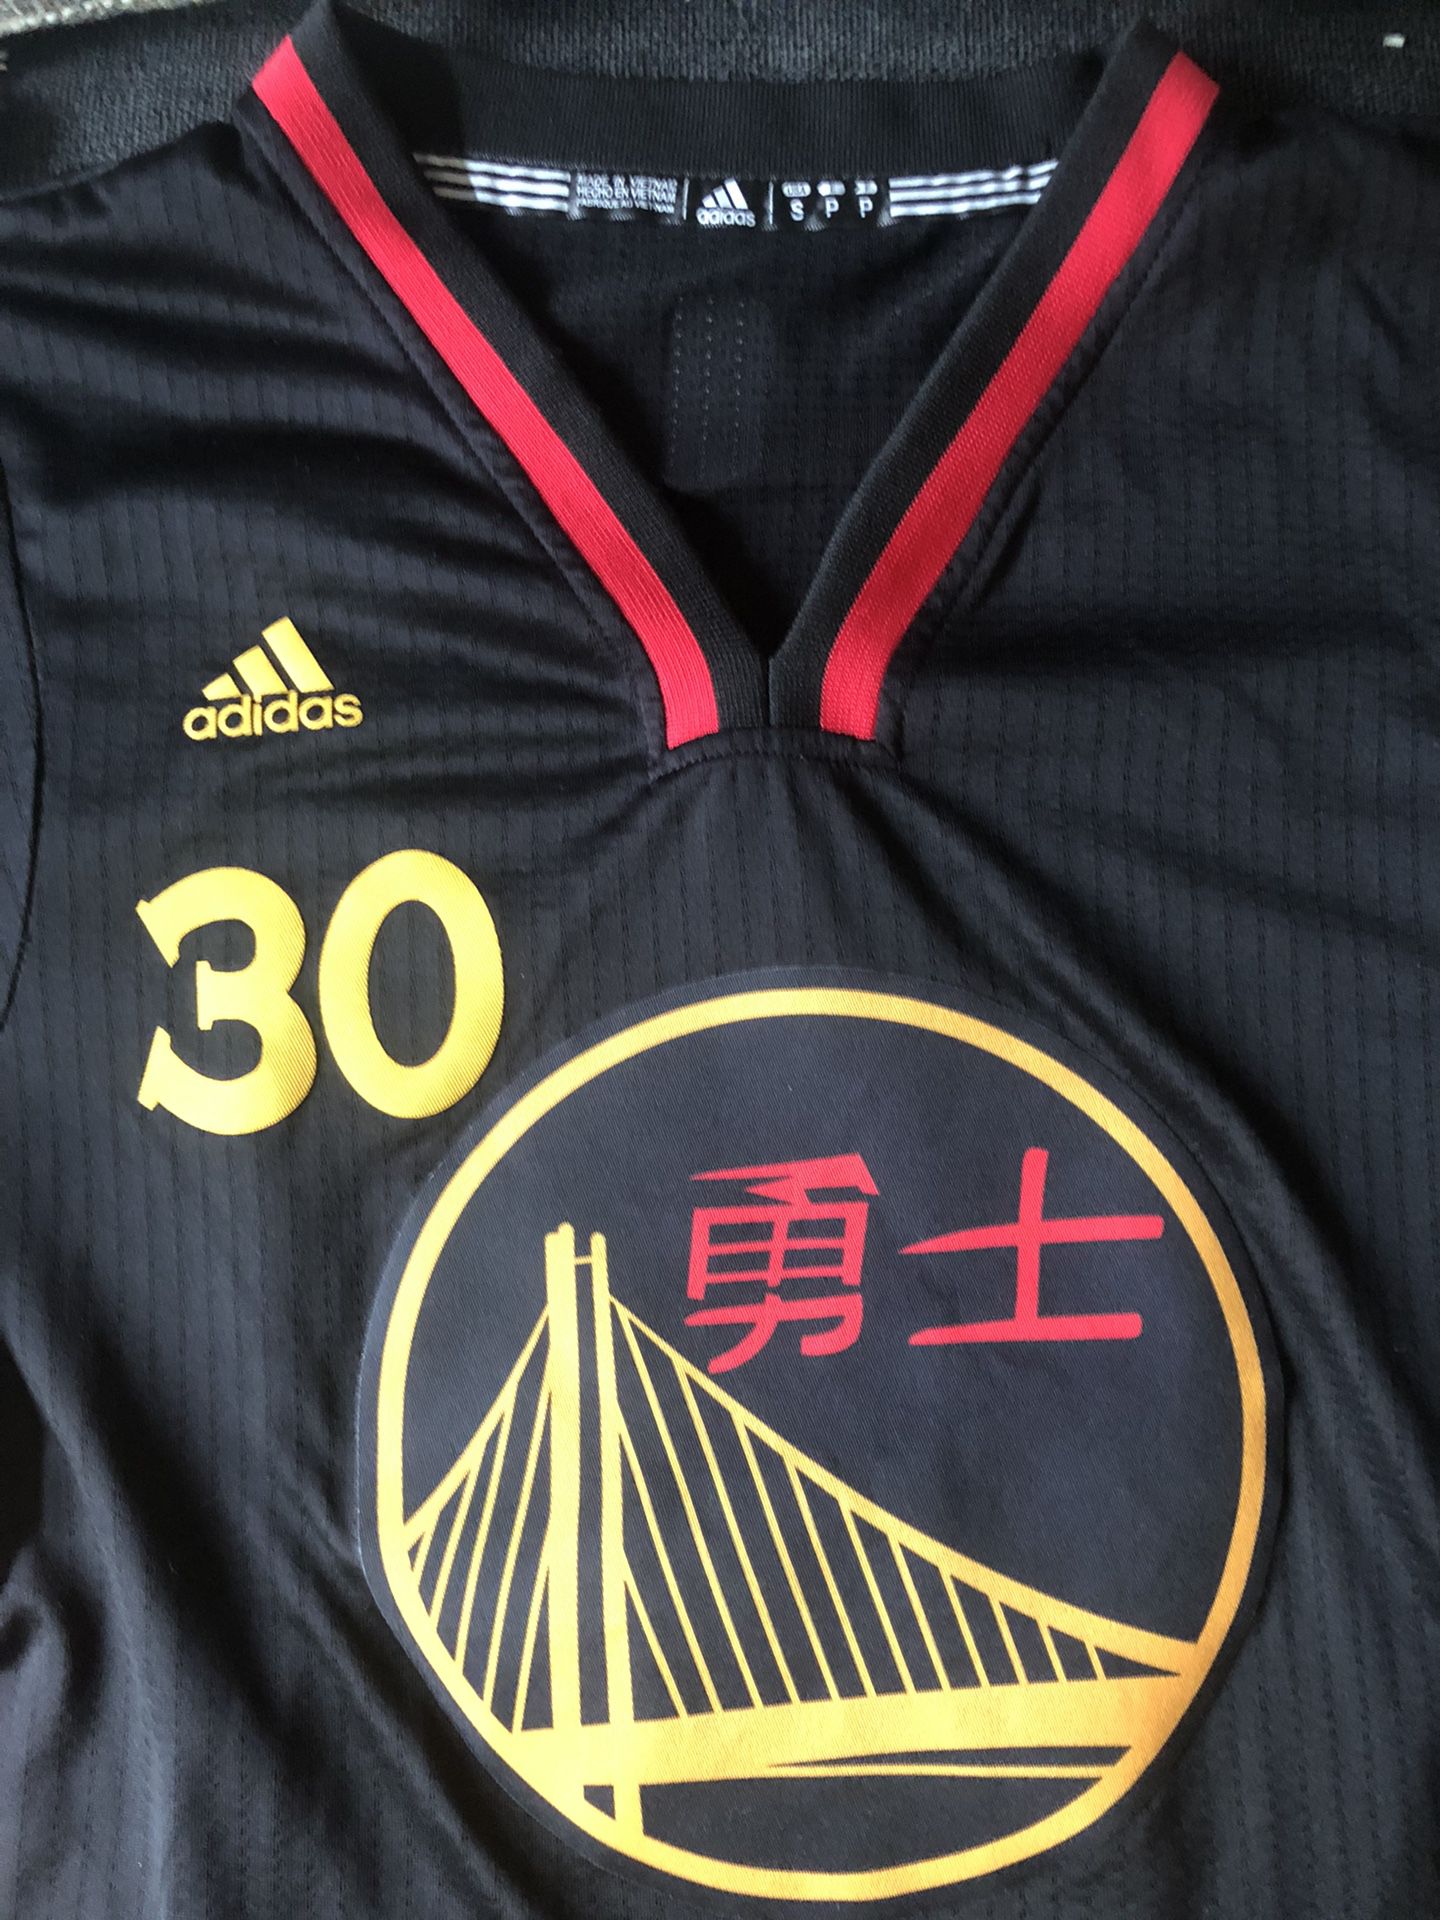 Golden State Warriors Nike Chinese Heritage THE BAY Steph Curry Jersey  Youth XL for Sale in Pinole, CA - OfferUp